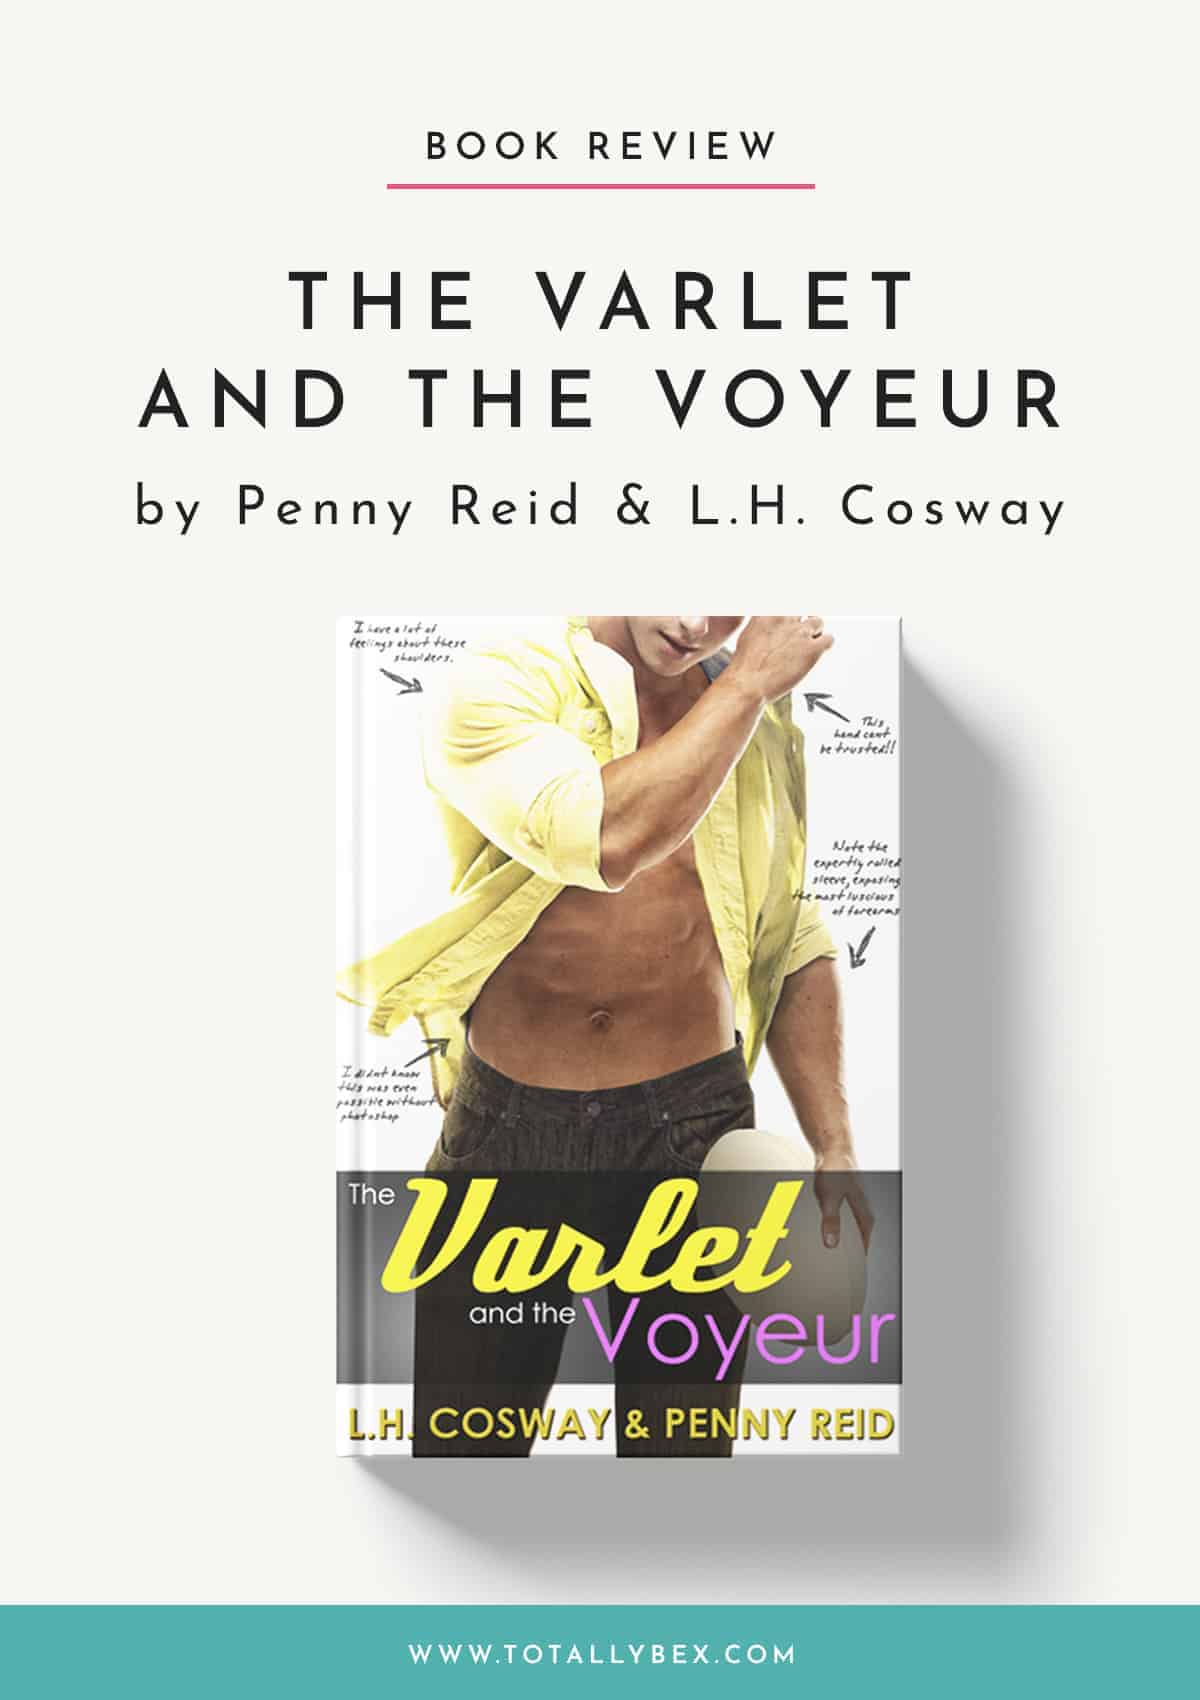 The Varlet and the Voyeur by Penny Reid and LH Cosway-Book Review